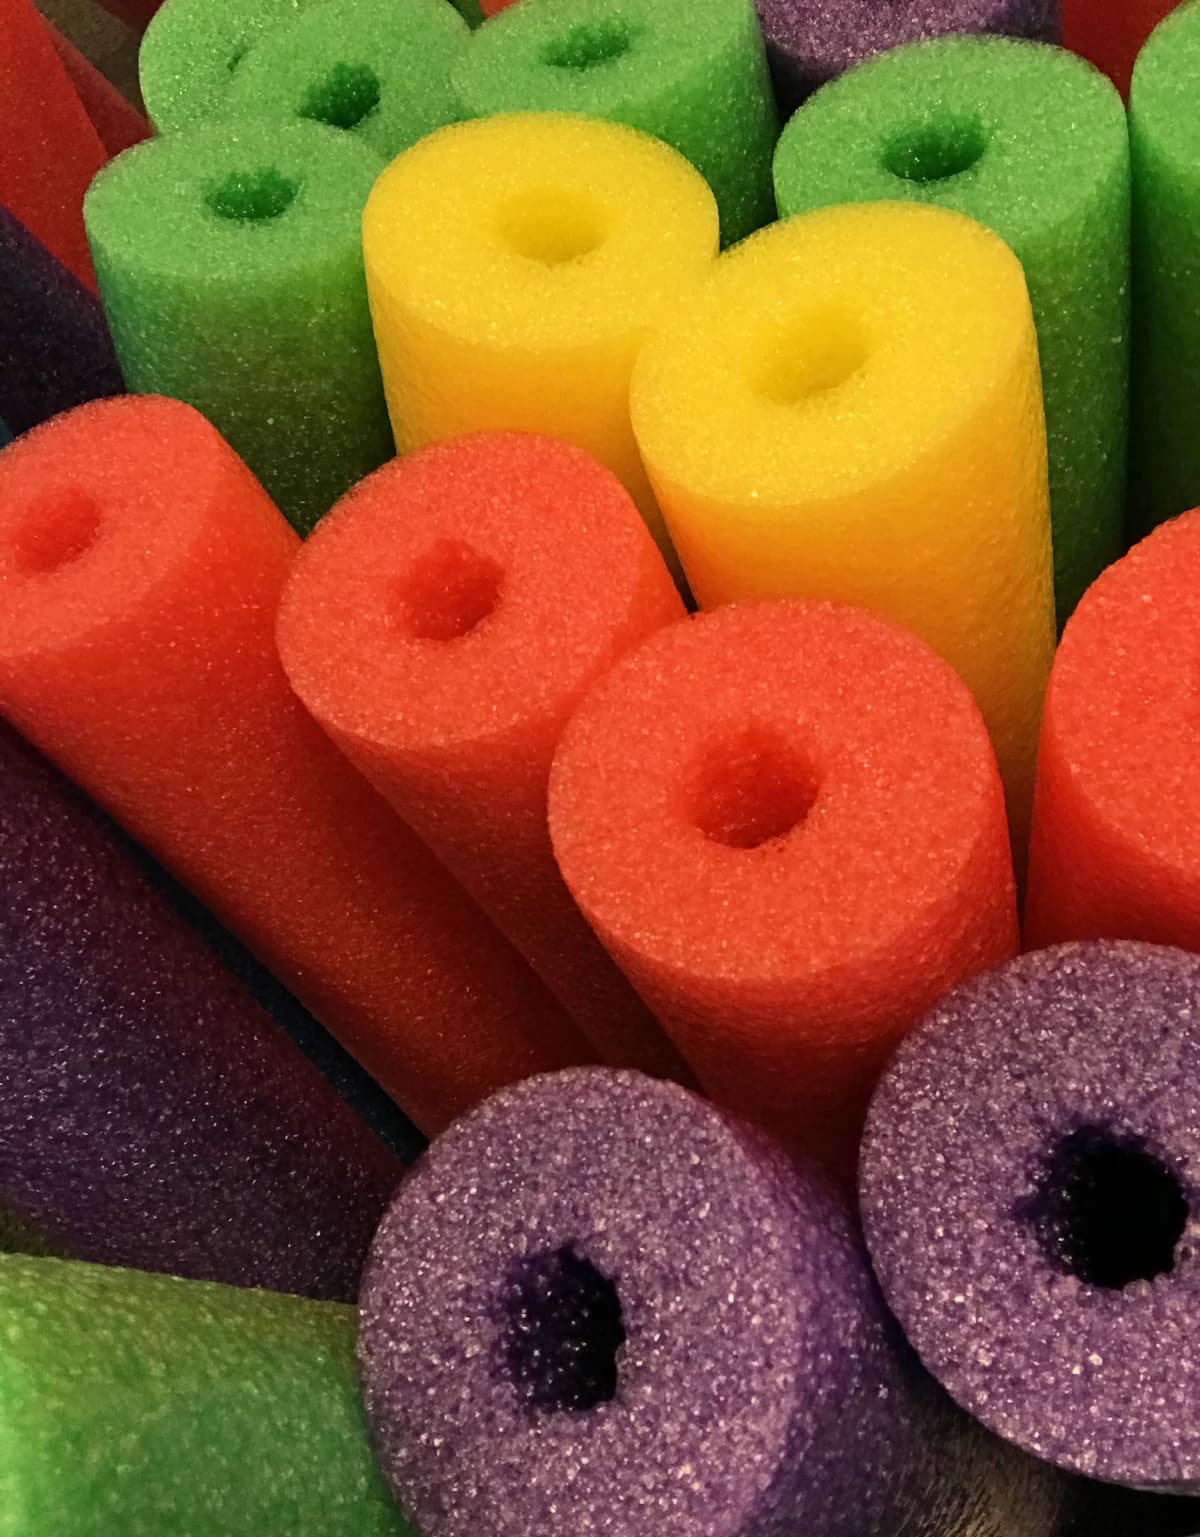 Pool noodles in vibrant colors stacked together